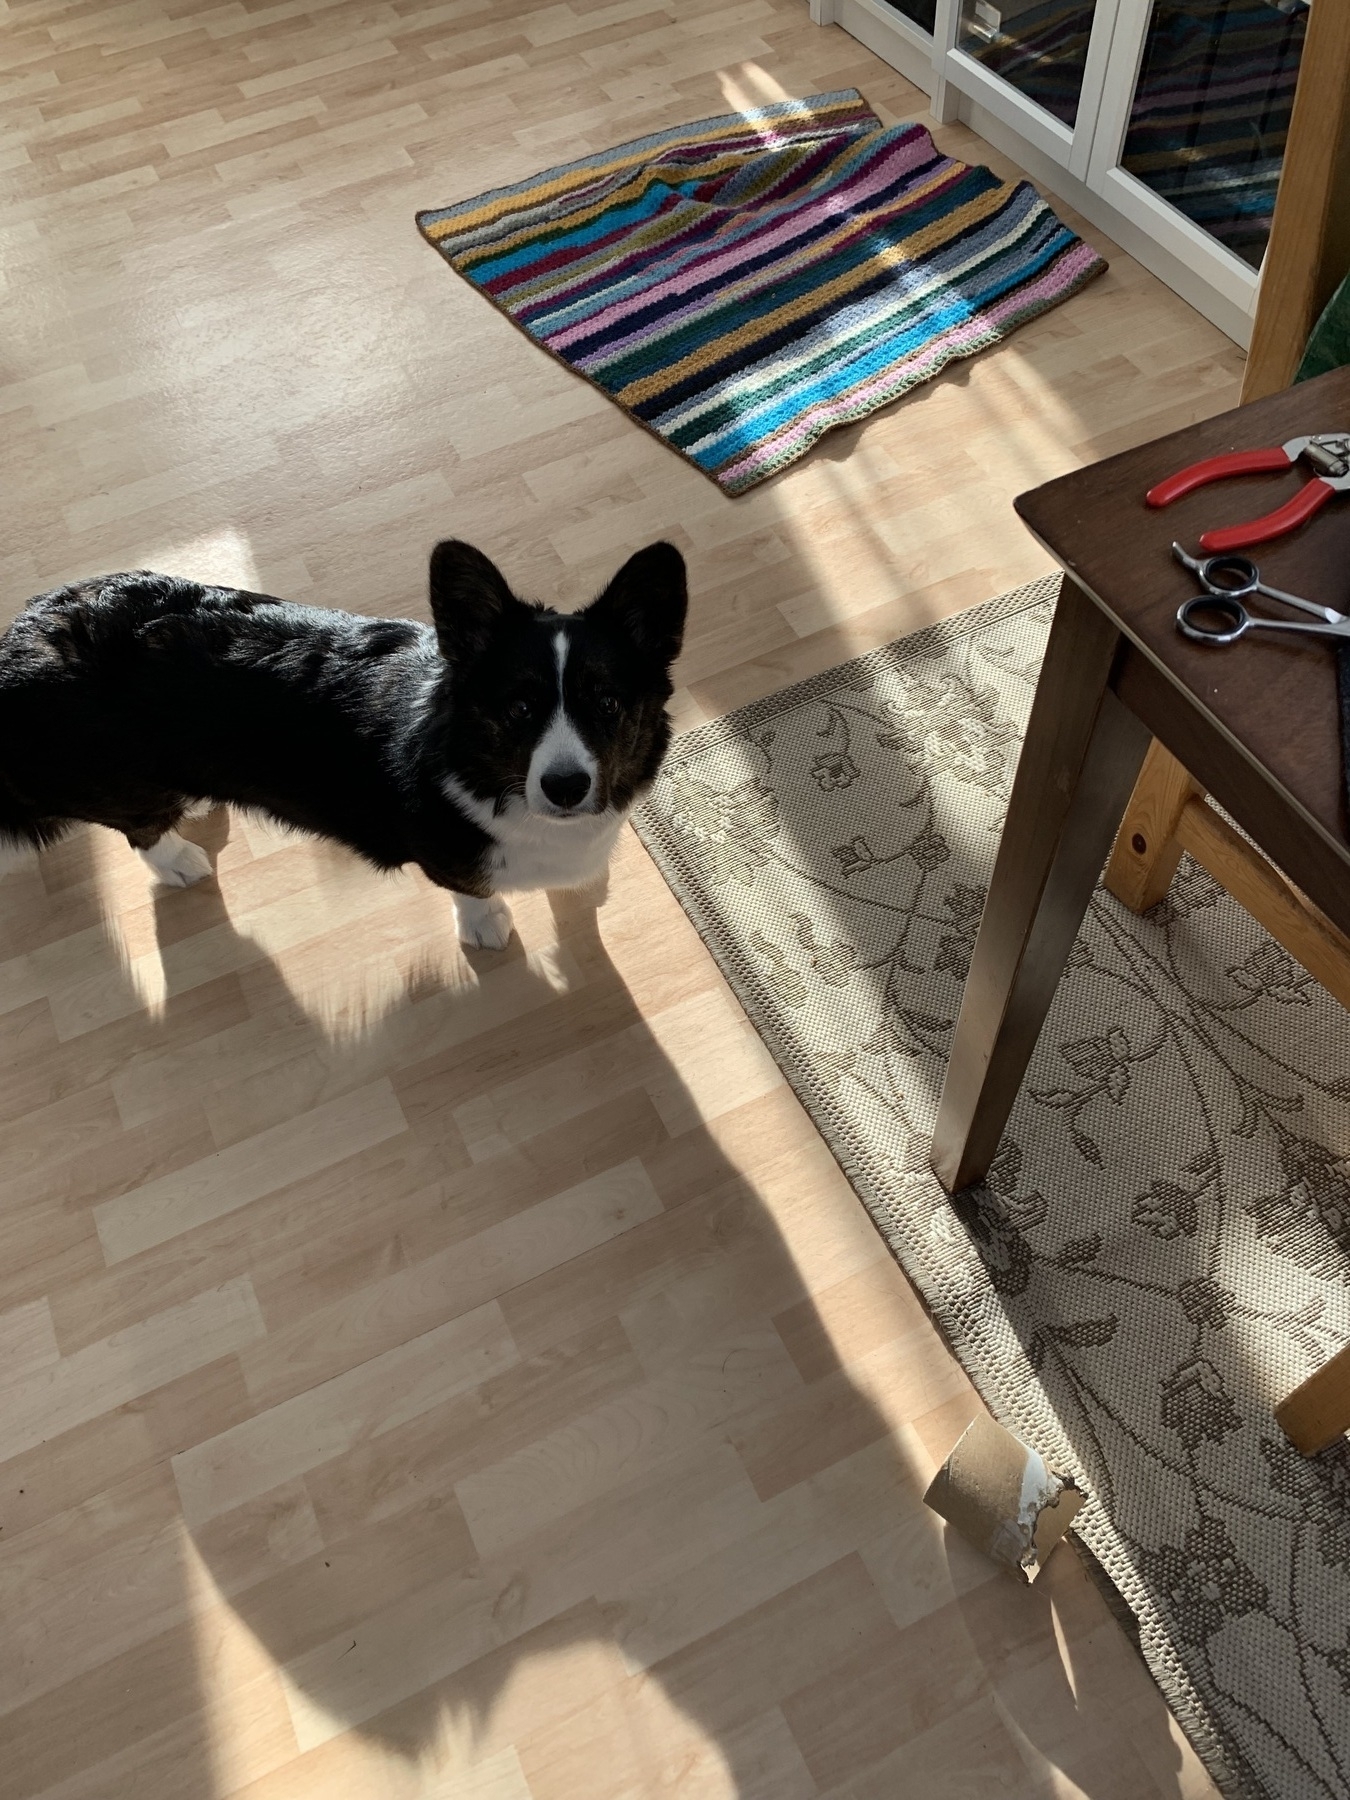 A dog (Napu) is looking at the camera, somewhat unsure. In the corner of the image a pair of scissors and a nail cutter are visible.